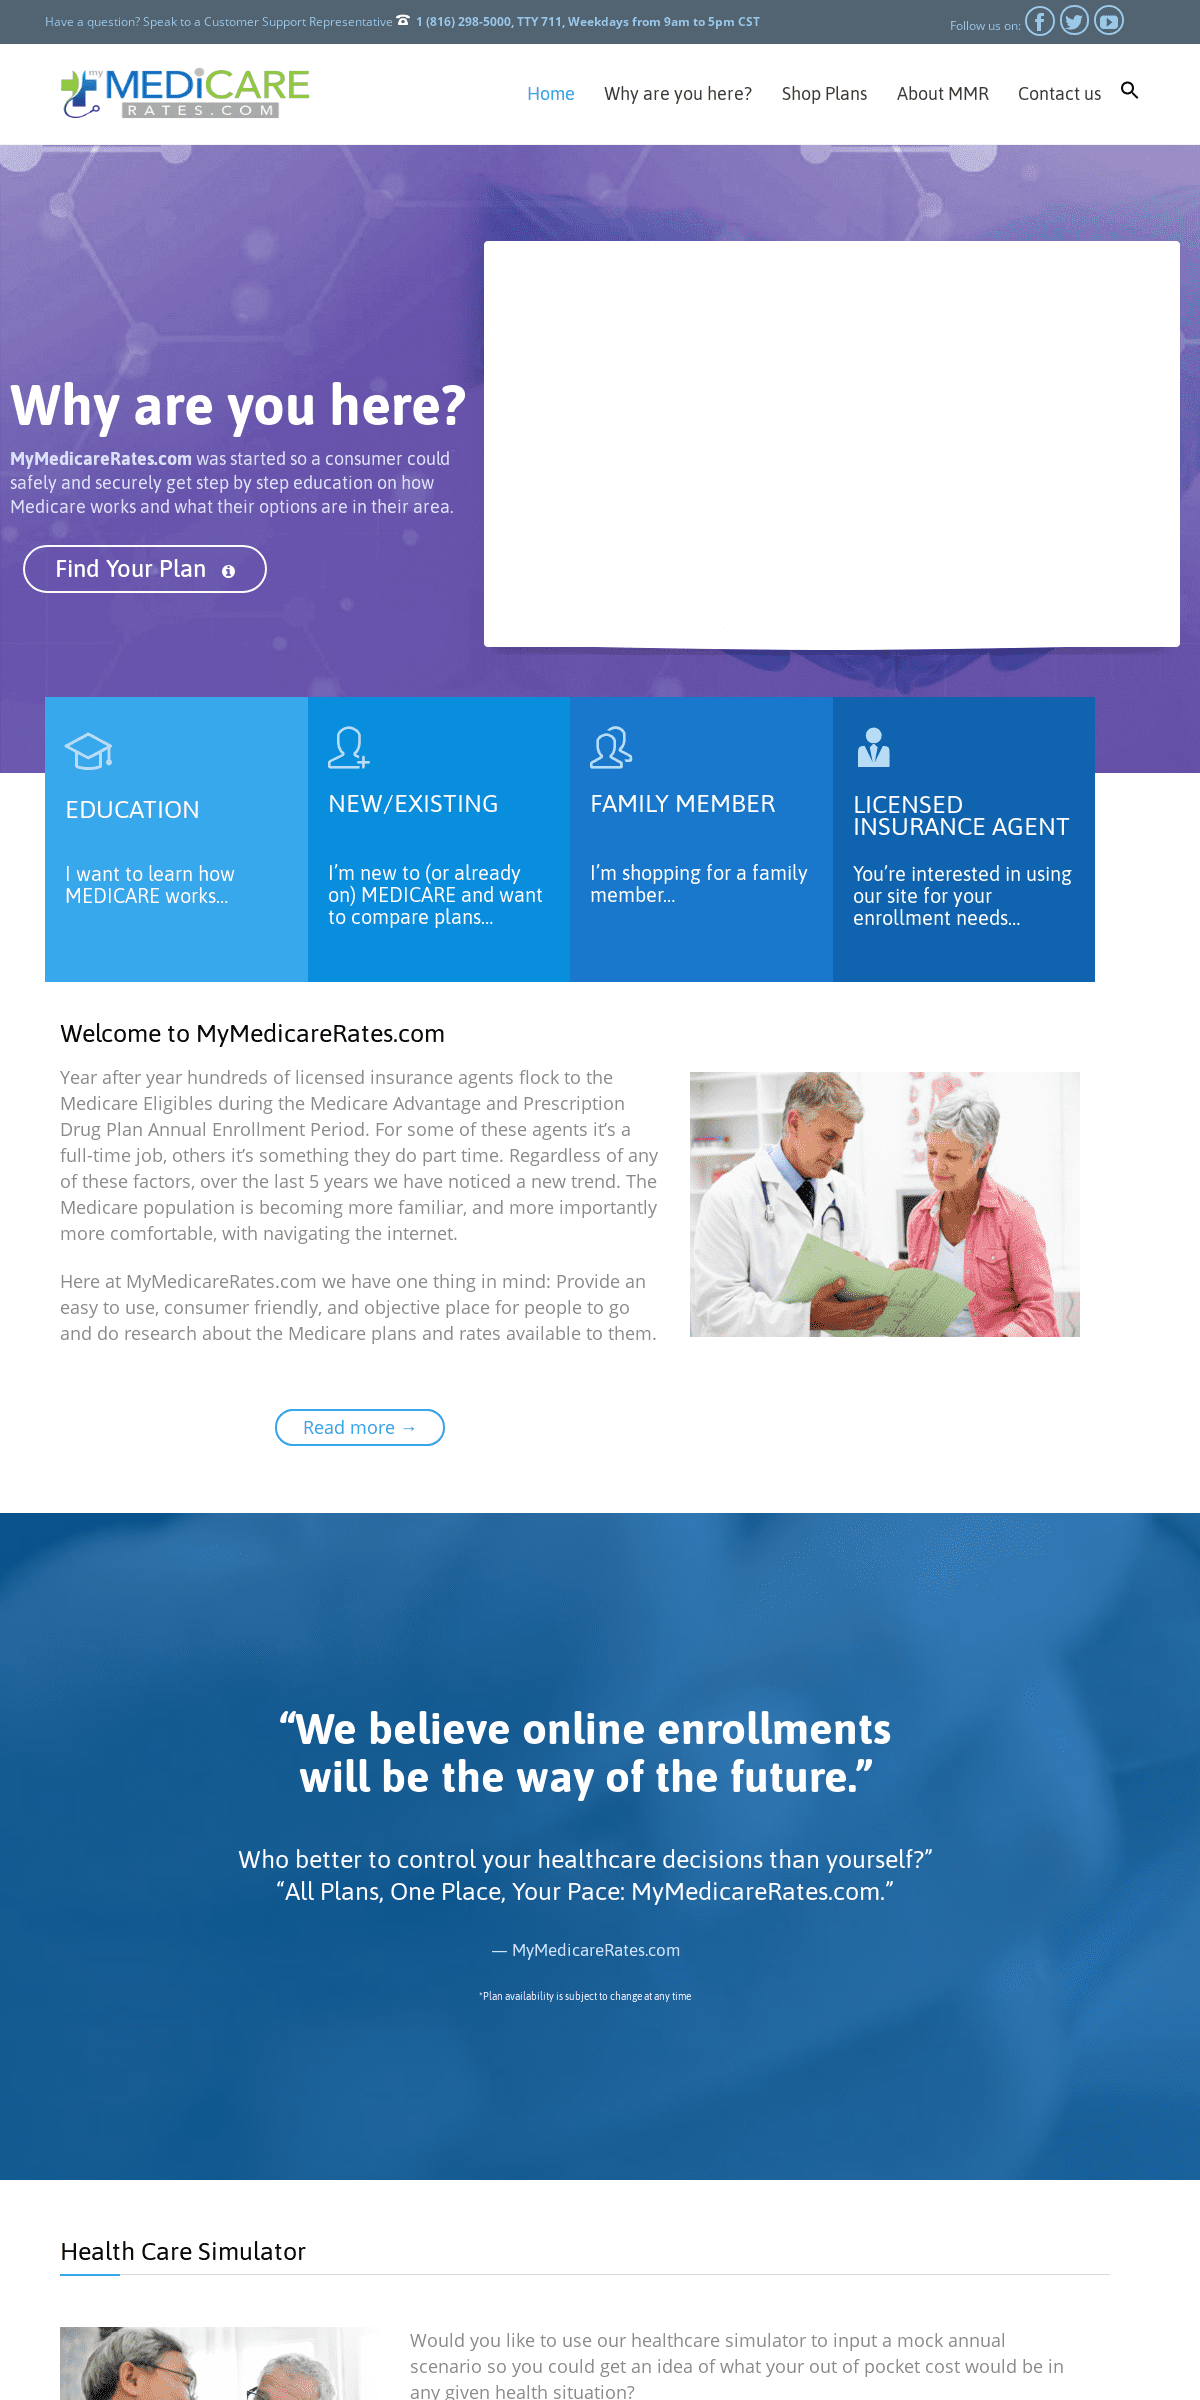 A complete backup of mymedicarerates.com